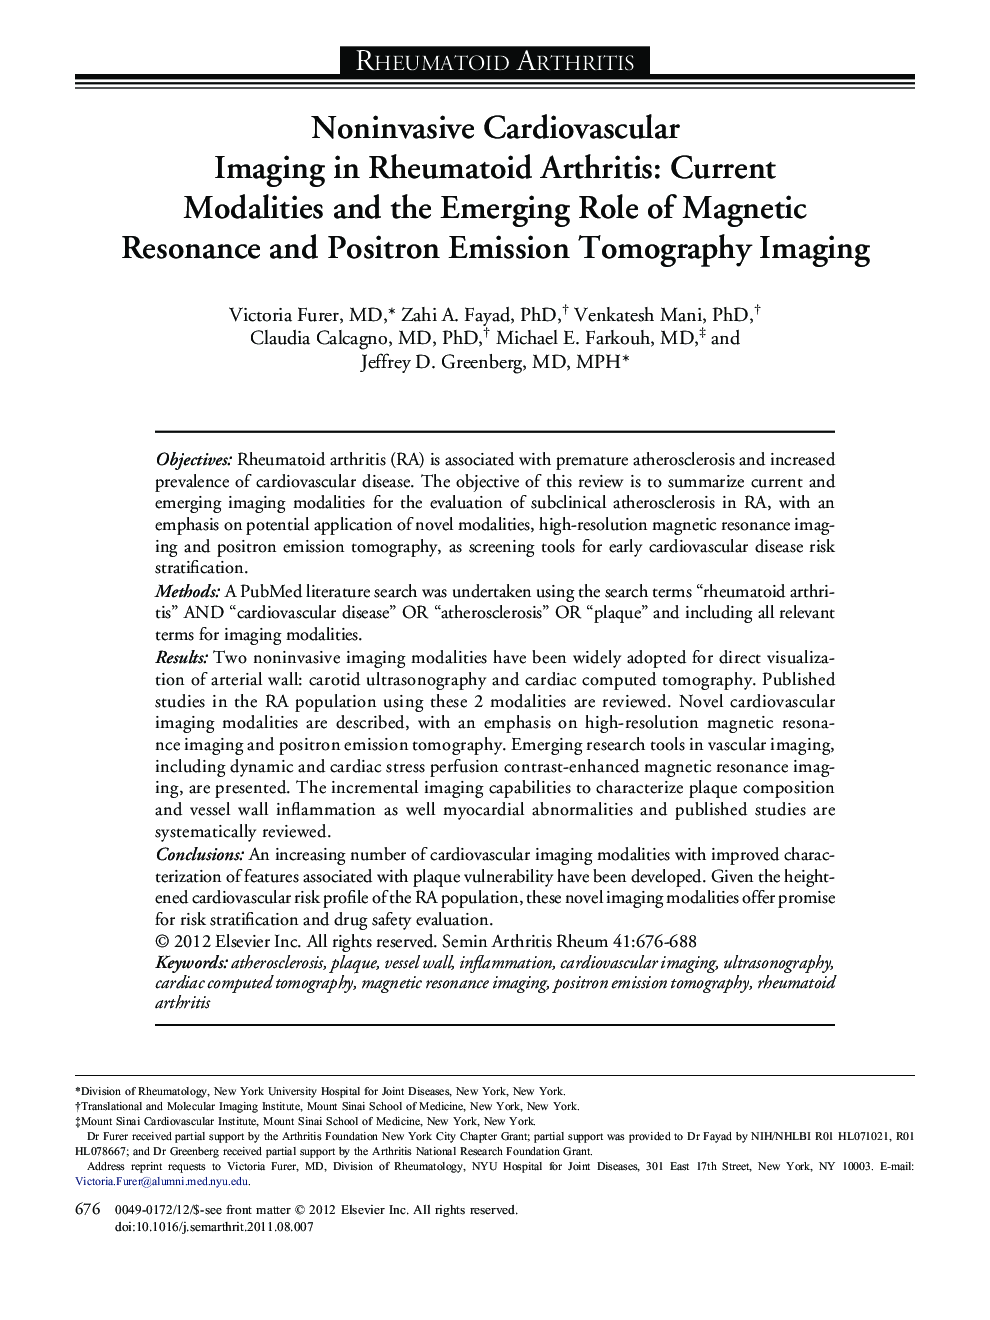 Noninvasive Cardiovascular Imaging in Rheumatoid Arthritis: Current Modalities and the Emerging Role of Magnetic Resonance and Positron Emission Tomography Imaging 